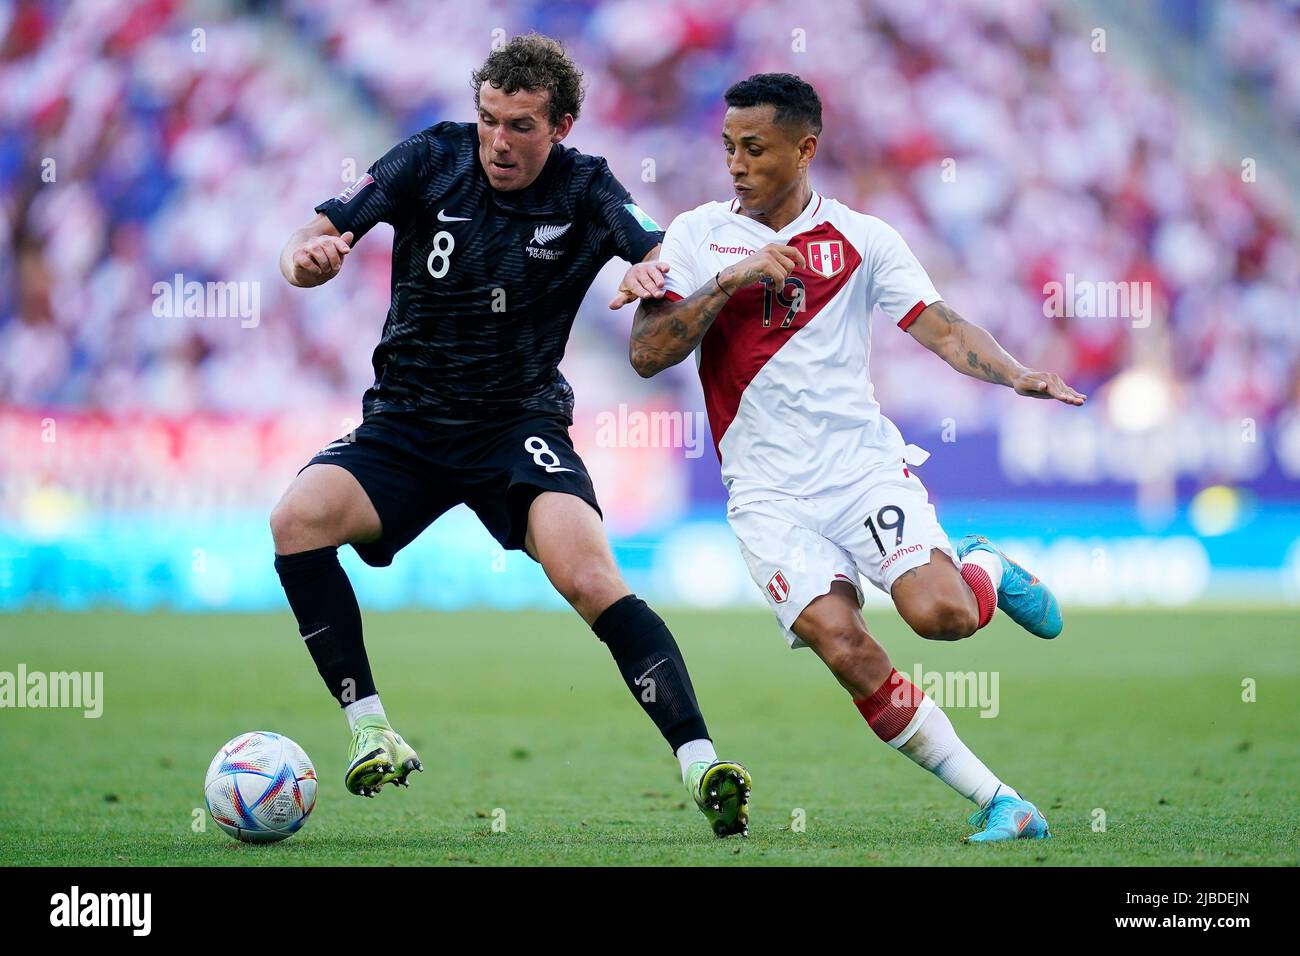 Barcelona, Spain. June 5, 2022, Joe Bell of  New Zealand and Yoshimar Yotun of Peru during the friendly match between Peru and New Zealand played at RCDE Stadium on June 5, 2022 in Barcelona, Spain. (Photo by Bagu Blanco / PRESSINPHOTO) Stock Photo